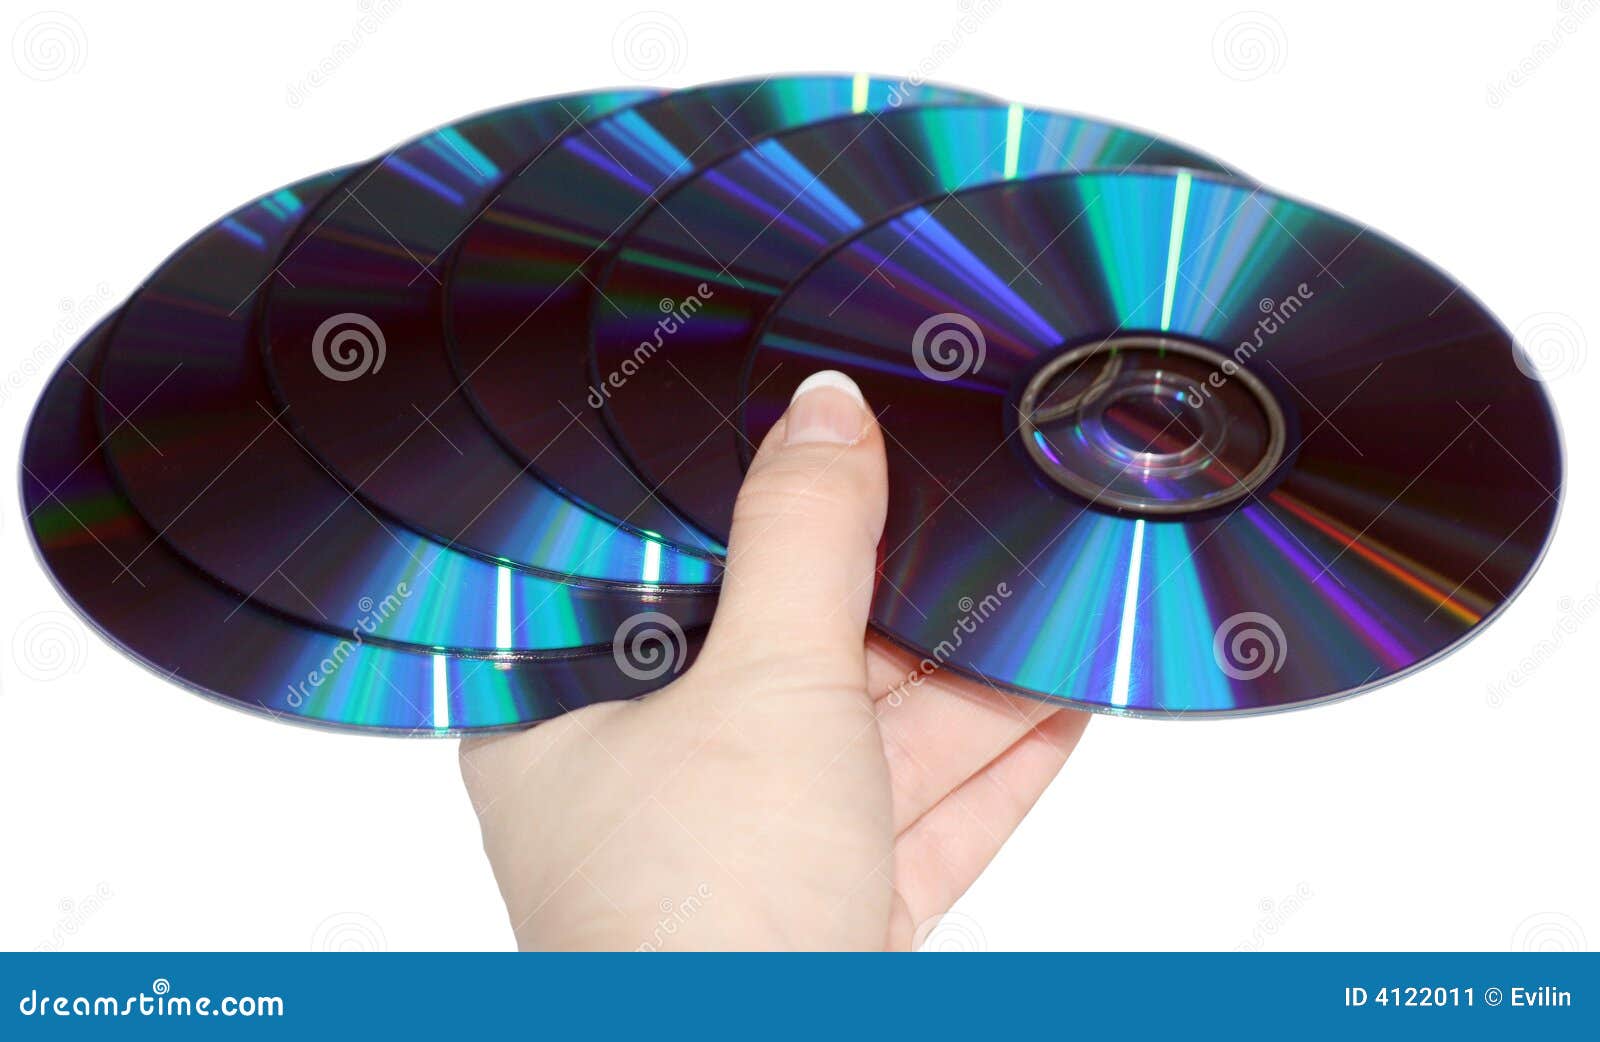 fan from compact discs